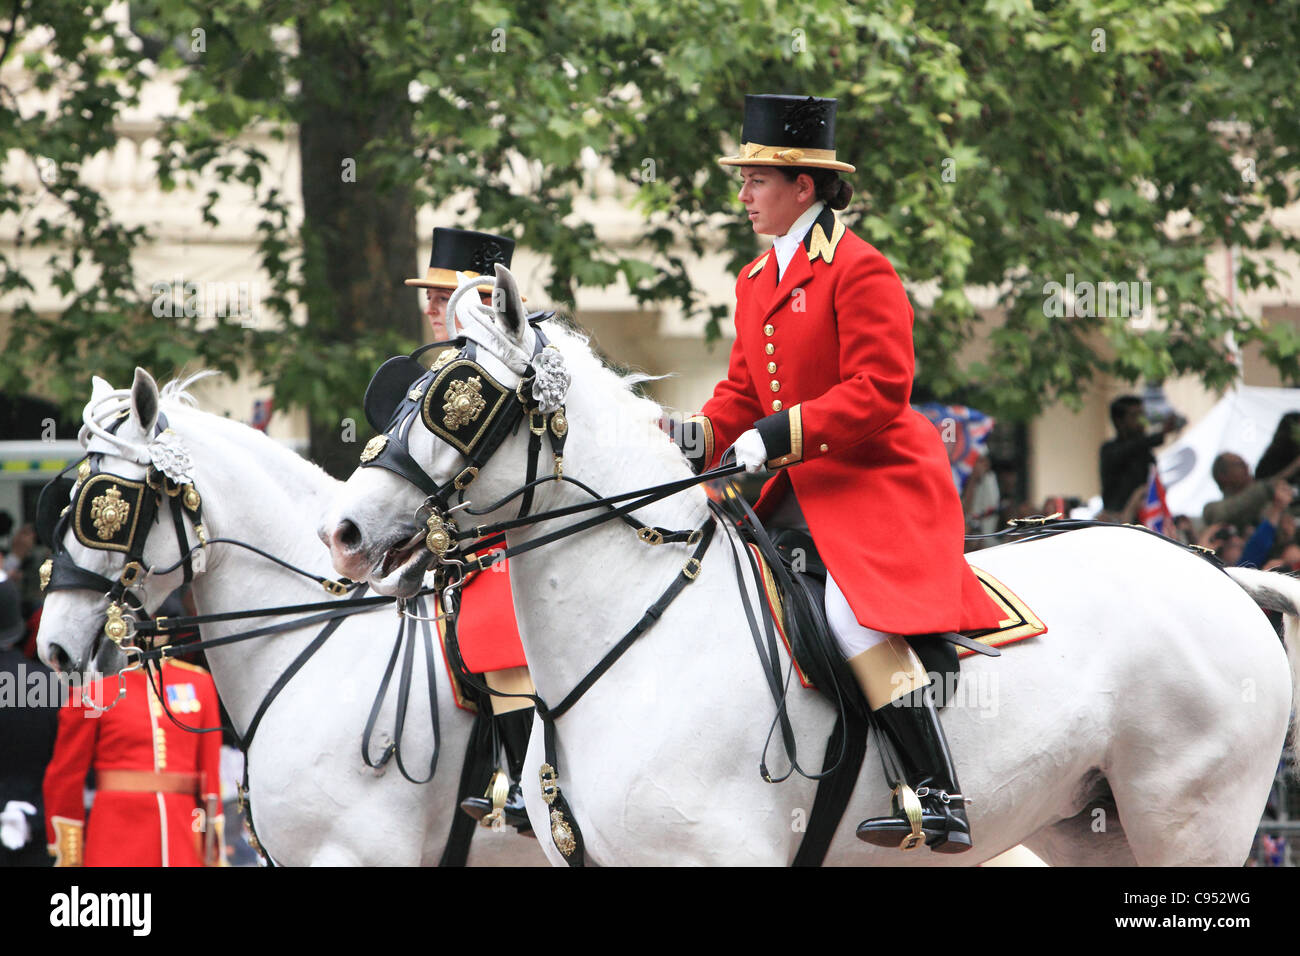 Display of pageantry on the Mall, London, UK Stock Photo